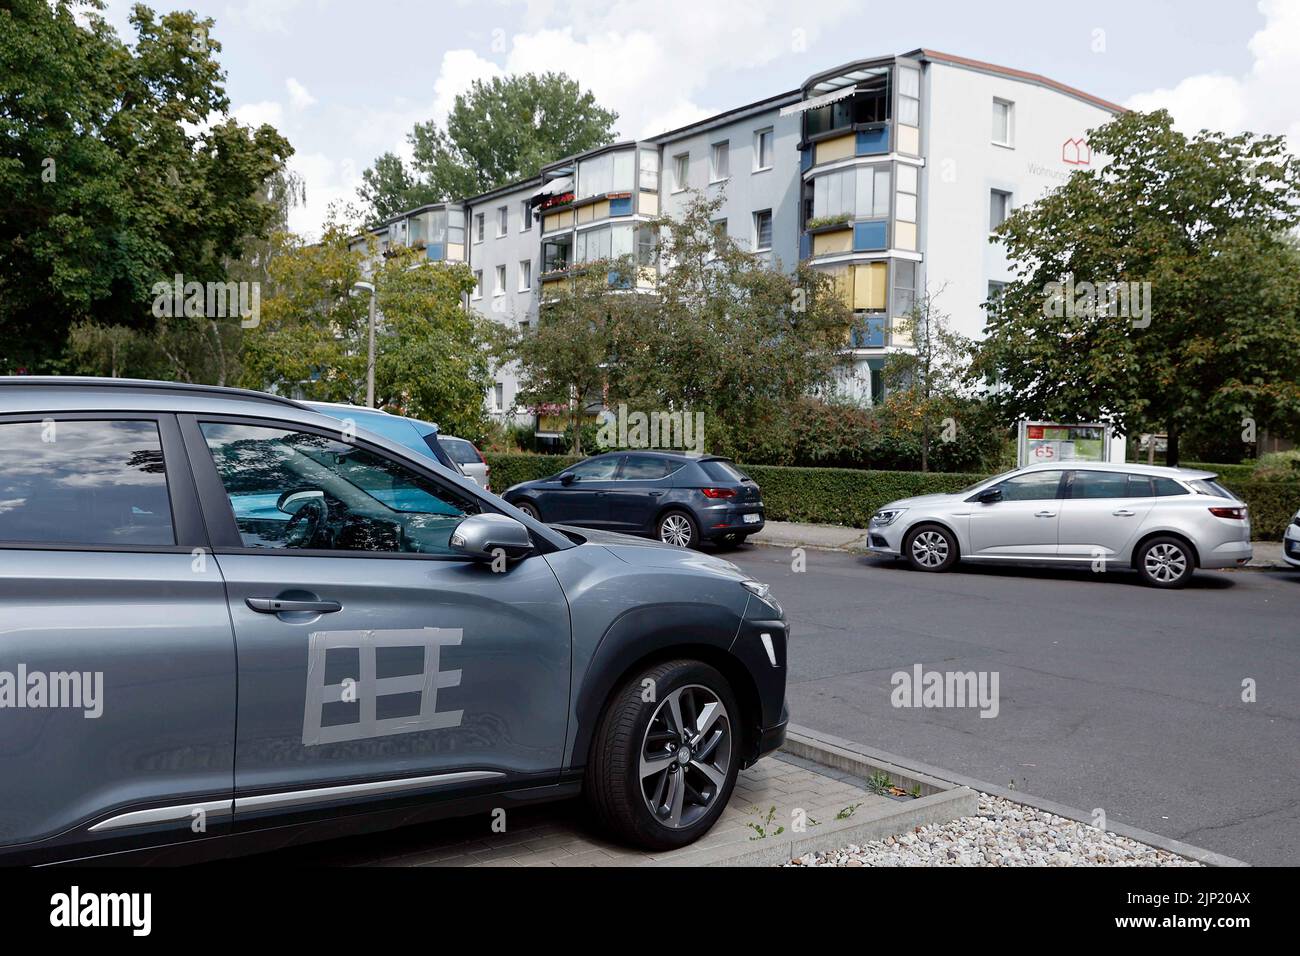 Berlin, Germany. 15th Aug, 2022. The doors of several cars have been taped over after swastikas were scratched into the doors and hoods of the cars. (to dpa "More swastikas discovered on car hoods in Berlin") Credit: Carsten Koall/dpa/Alamy Live News Stock Photo